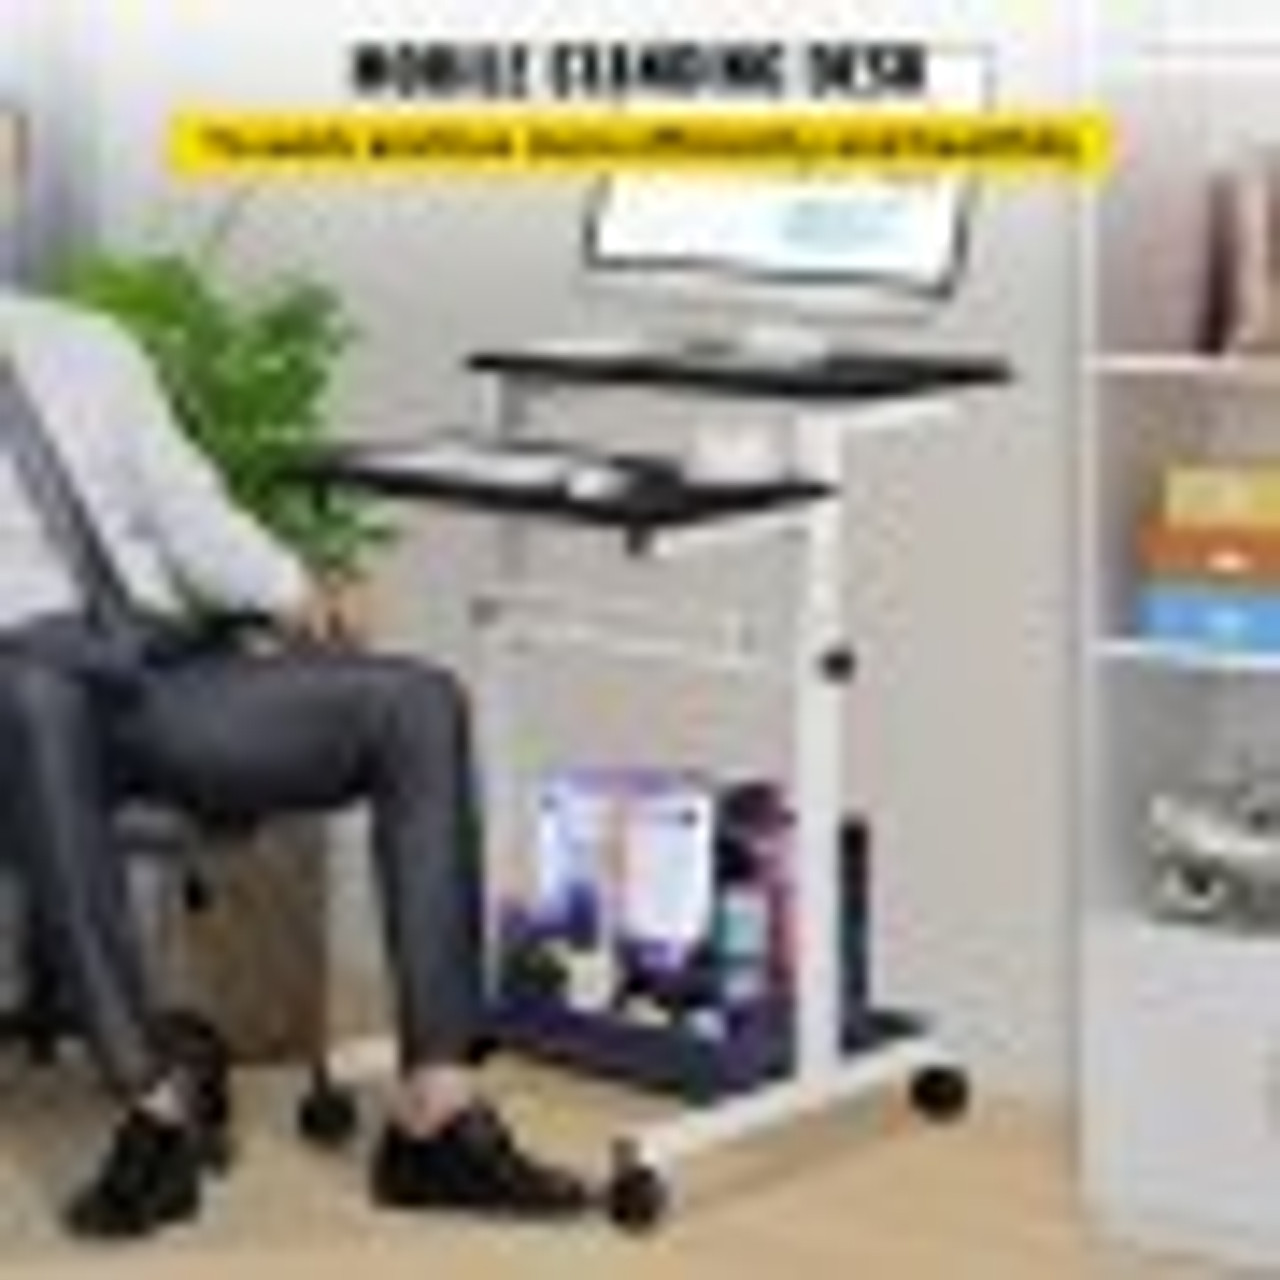 Mobile Standing Desk, Rolling Laptop Desk w/ Three Shelves, 34-47in Adjustable Height with Four 360ø Rotation Wheels for Home, Office